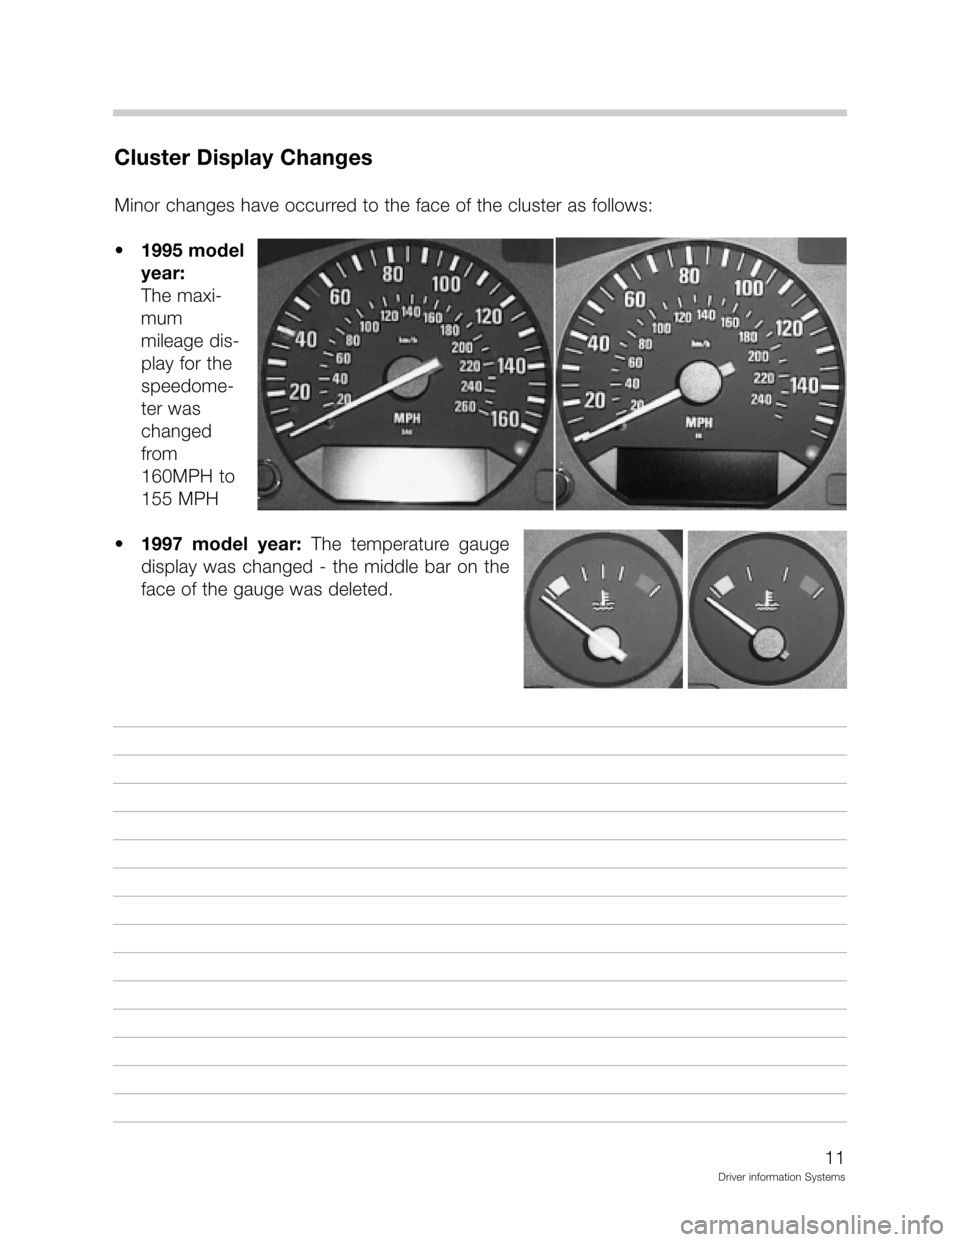 BMW Z3 CONVERTIBLE 2001 E36 Driver Information Systems Manual 	-+	
&2	!;;
	;

:>
?9==6
	
	3

F

	



!

;
!

:
!
;

(&+7
%%&+7
?9